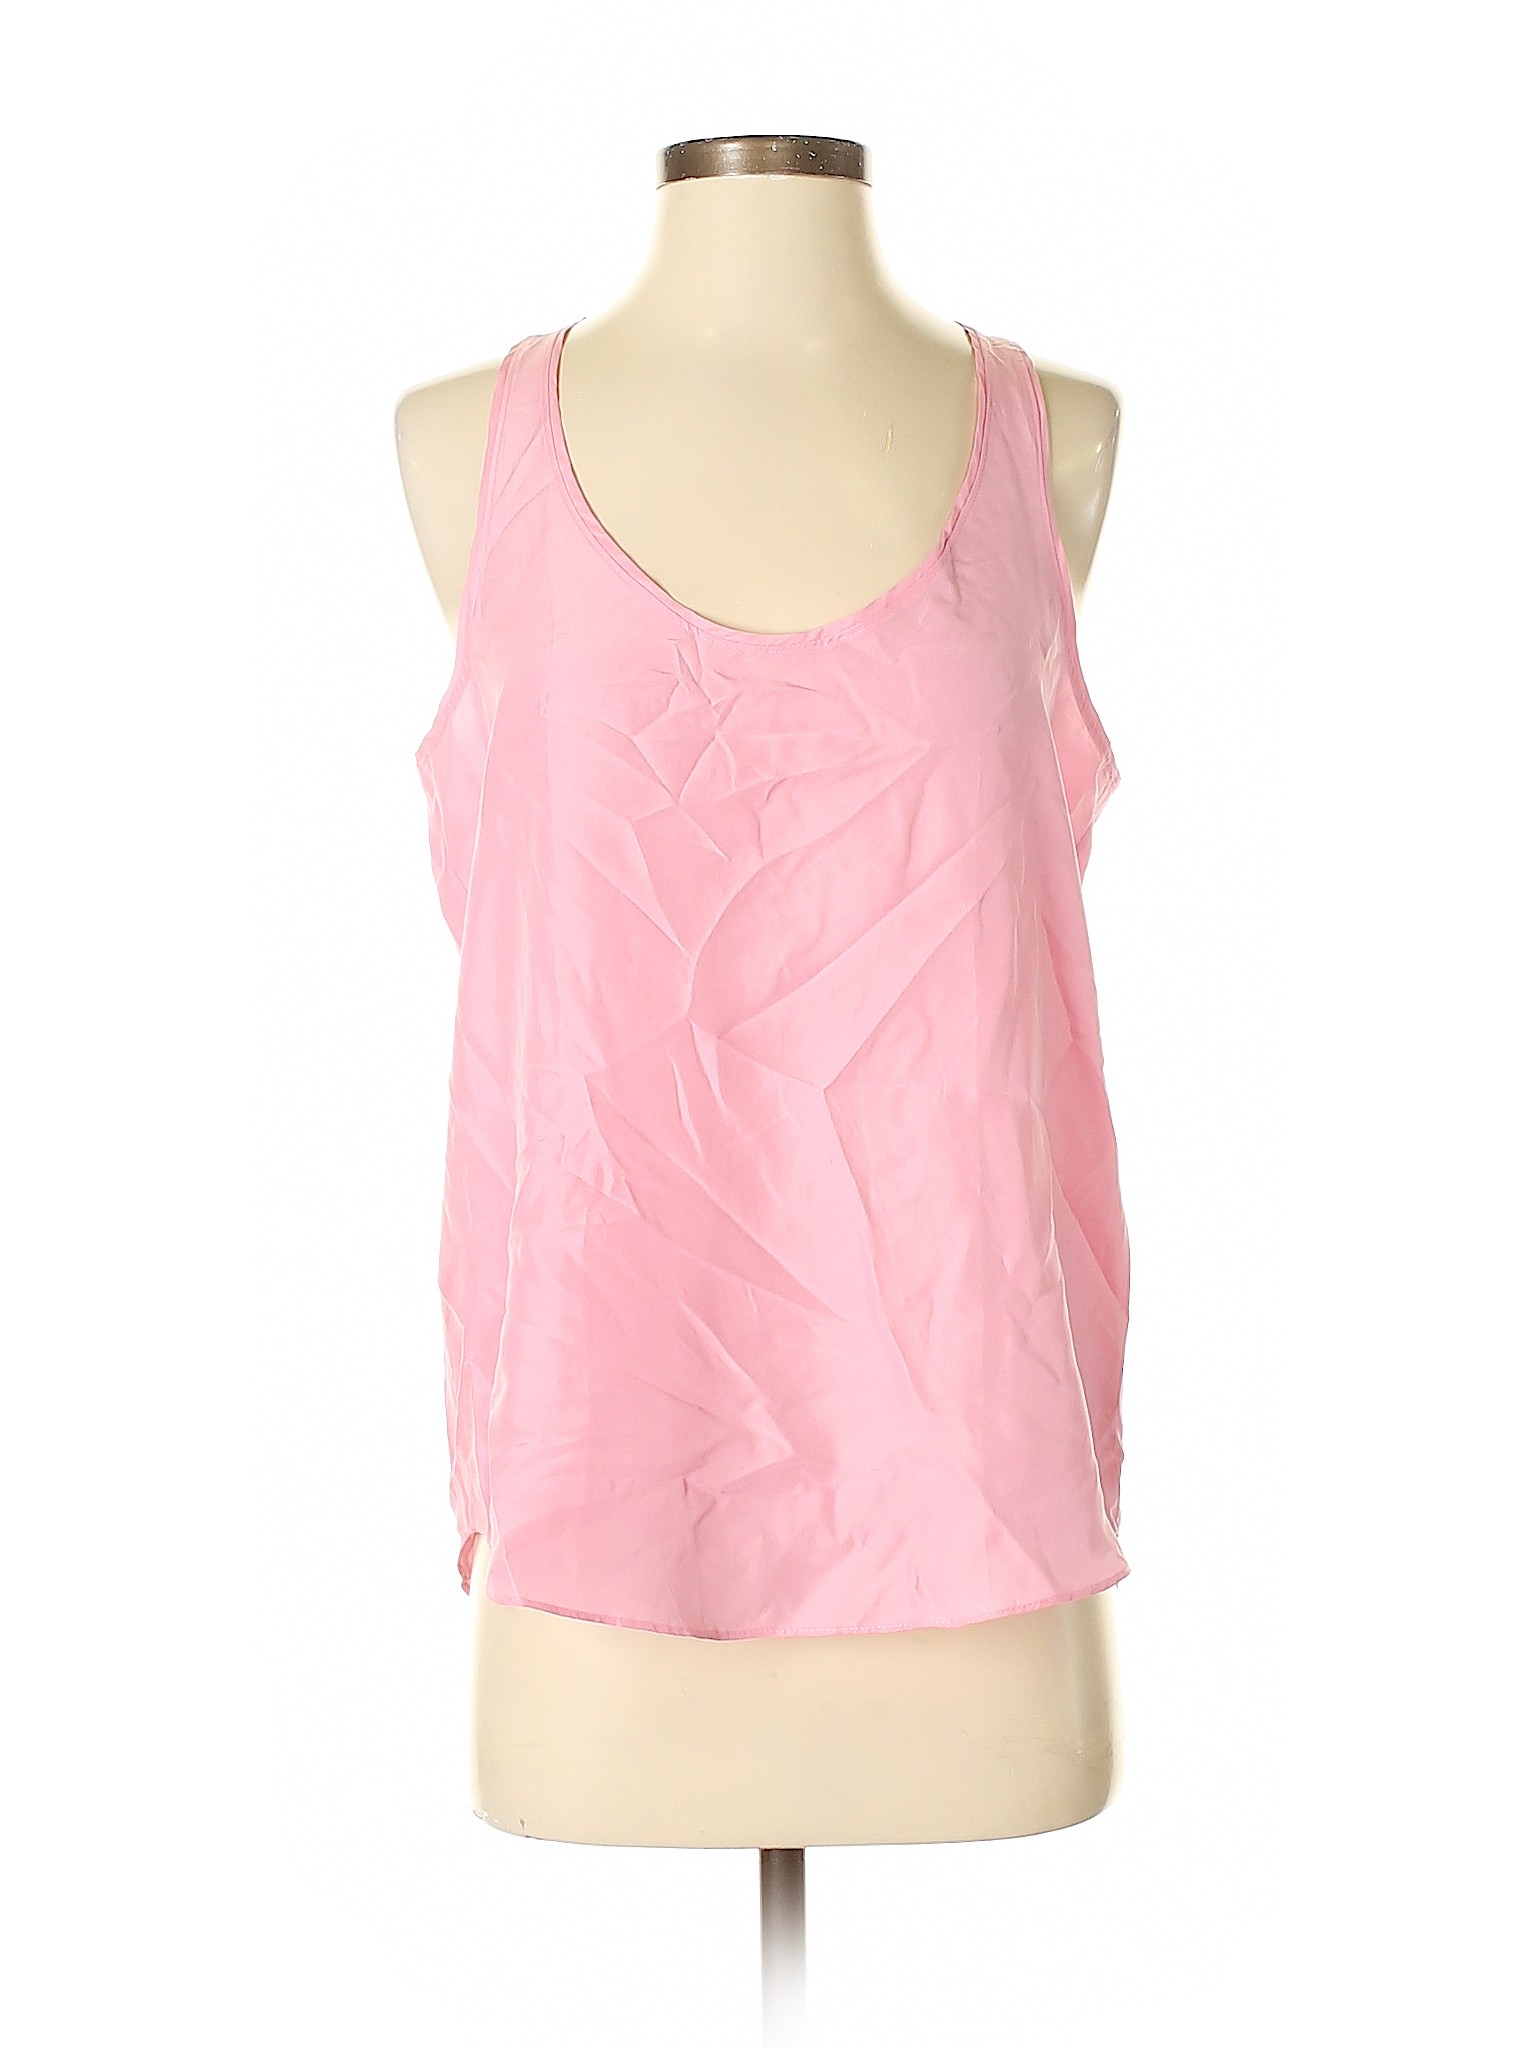 Details about NWT Theory Women Pink Sleeveless Silk Top Sm Petite